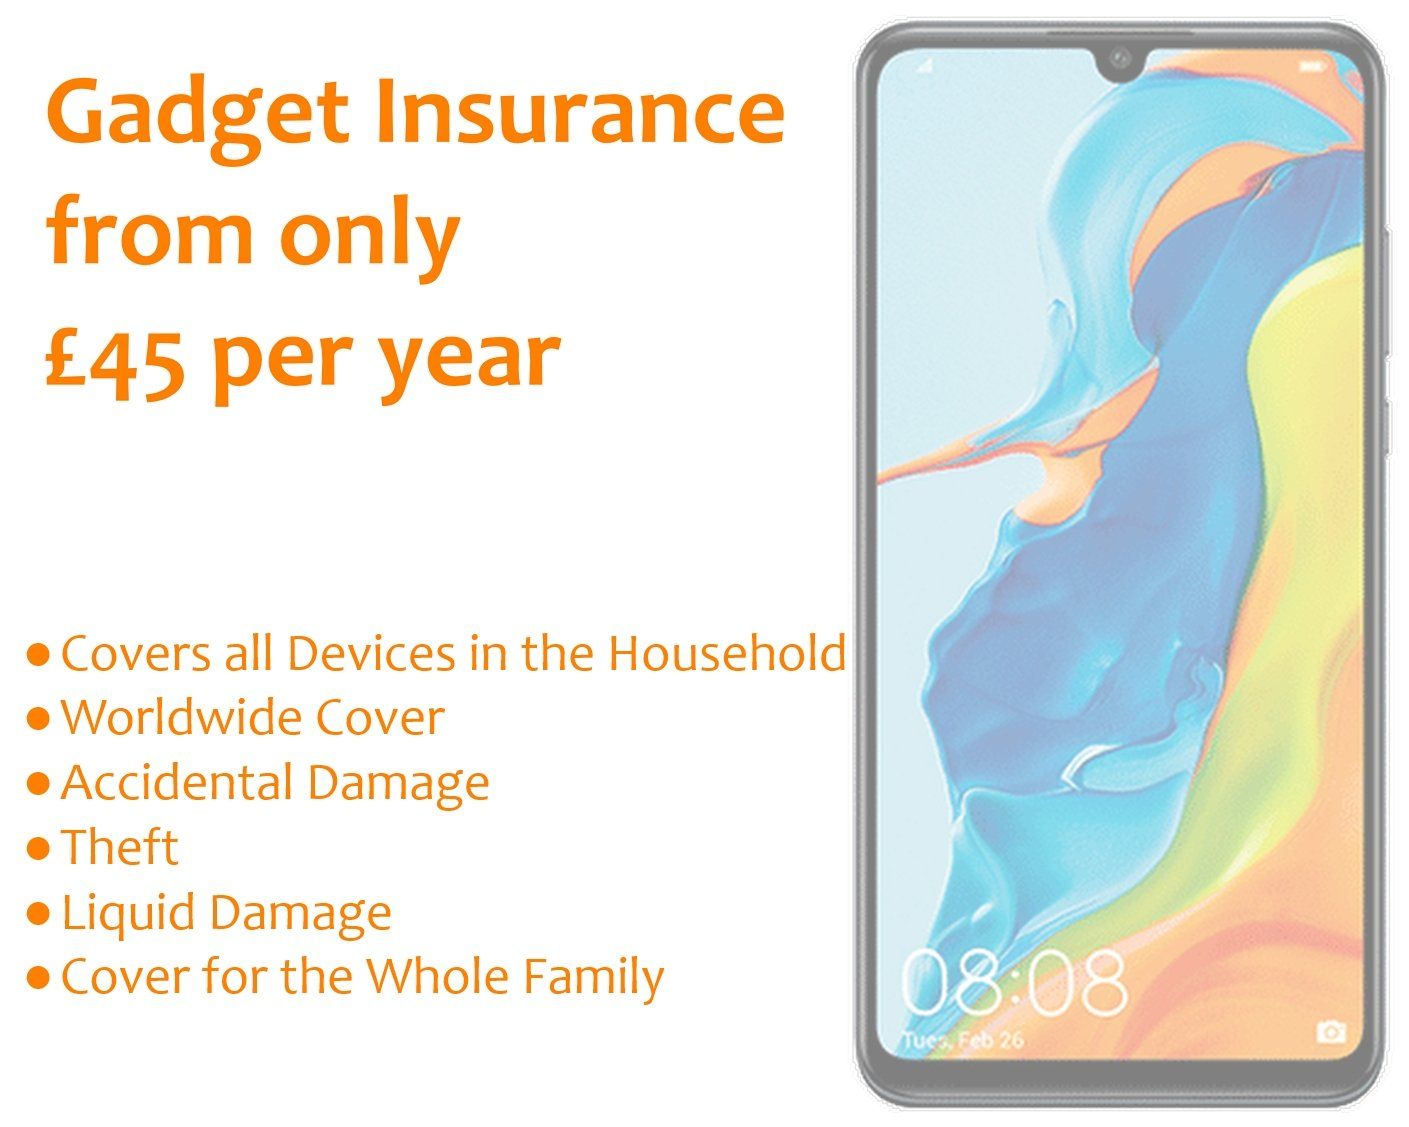 Great Value Gadget Cover Insurance